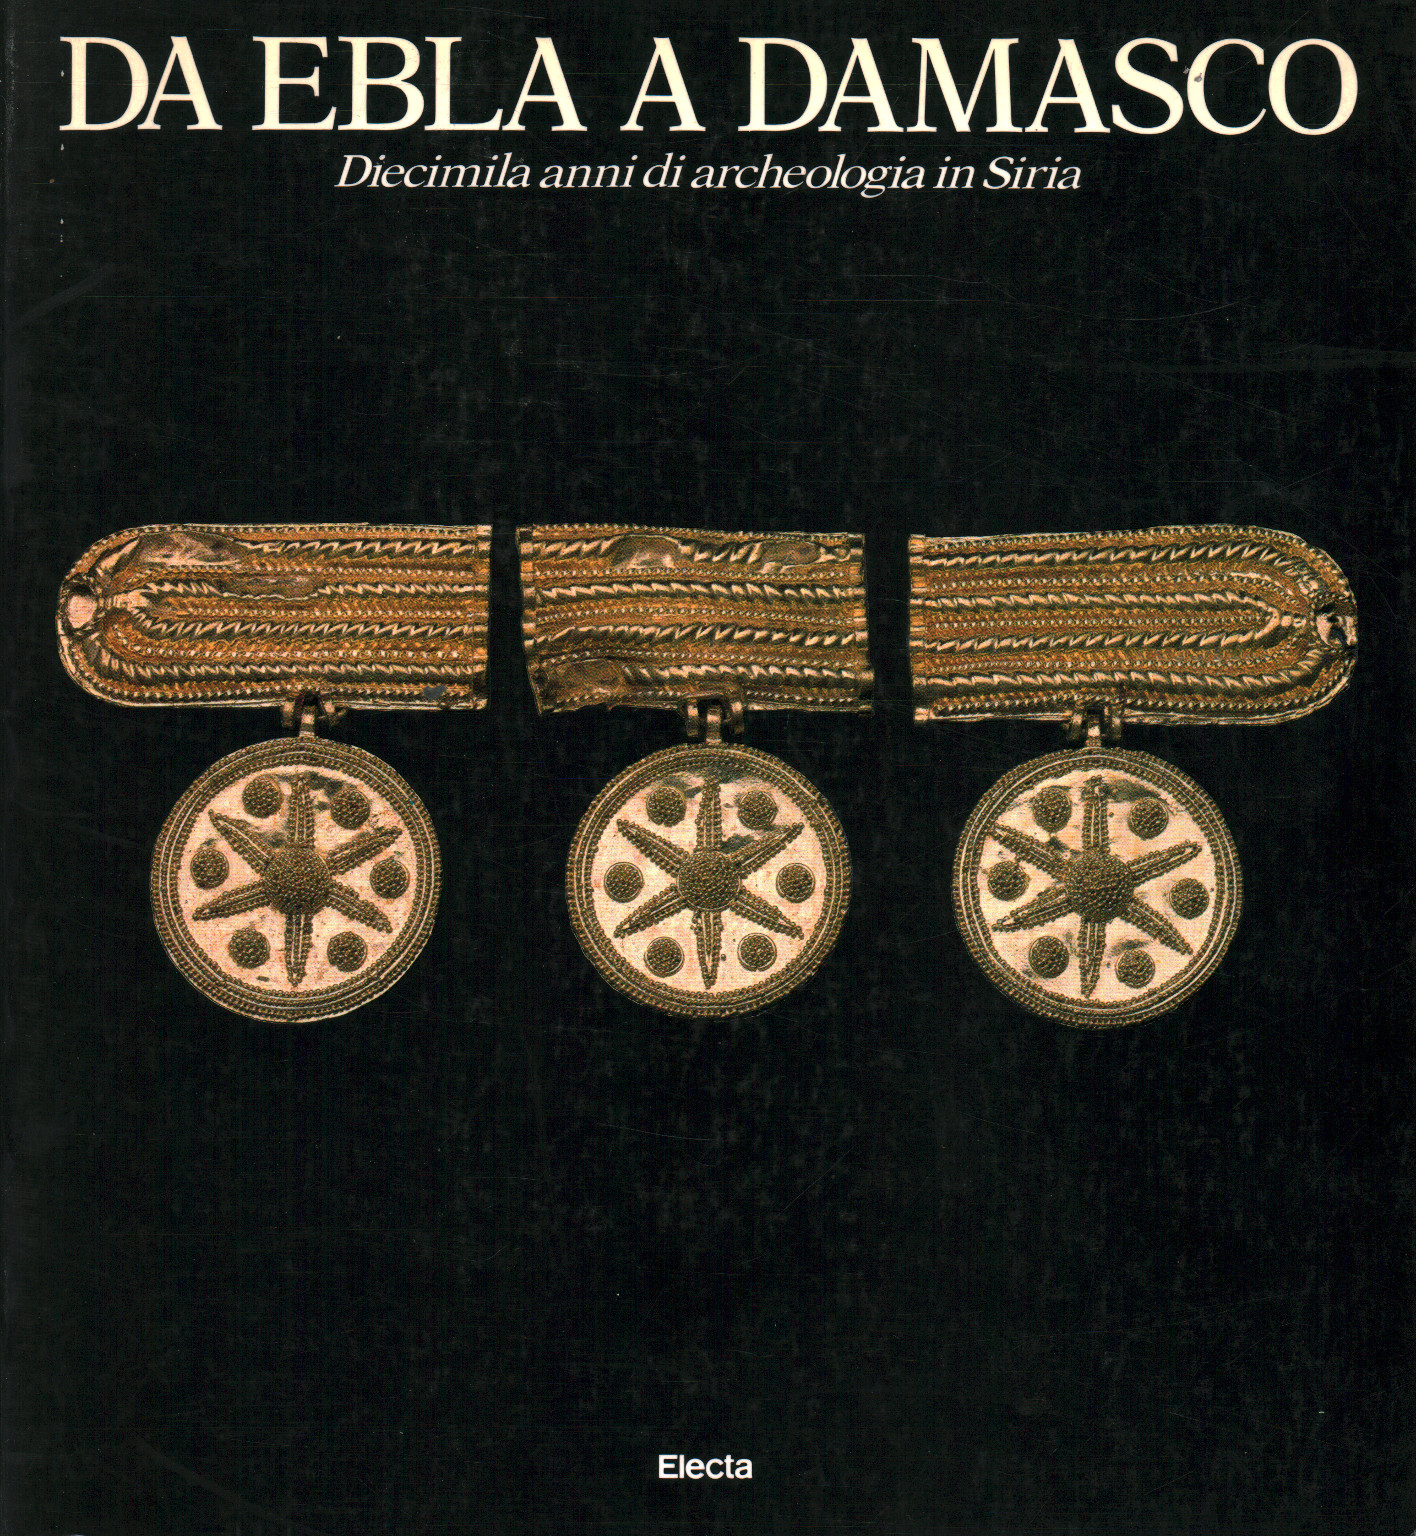 From Ebla to Damascus: Ten Thousand Years of%2